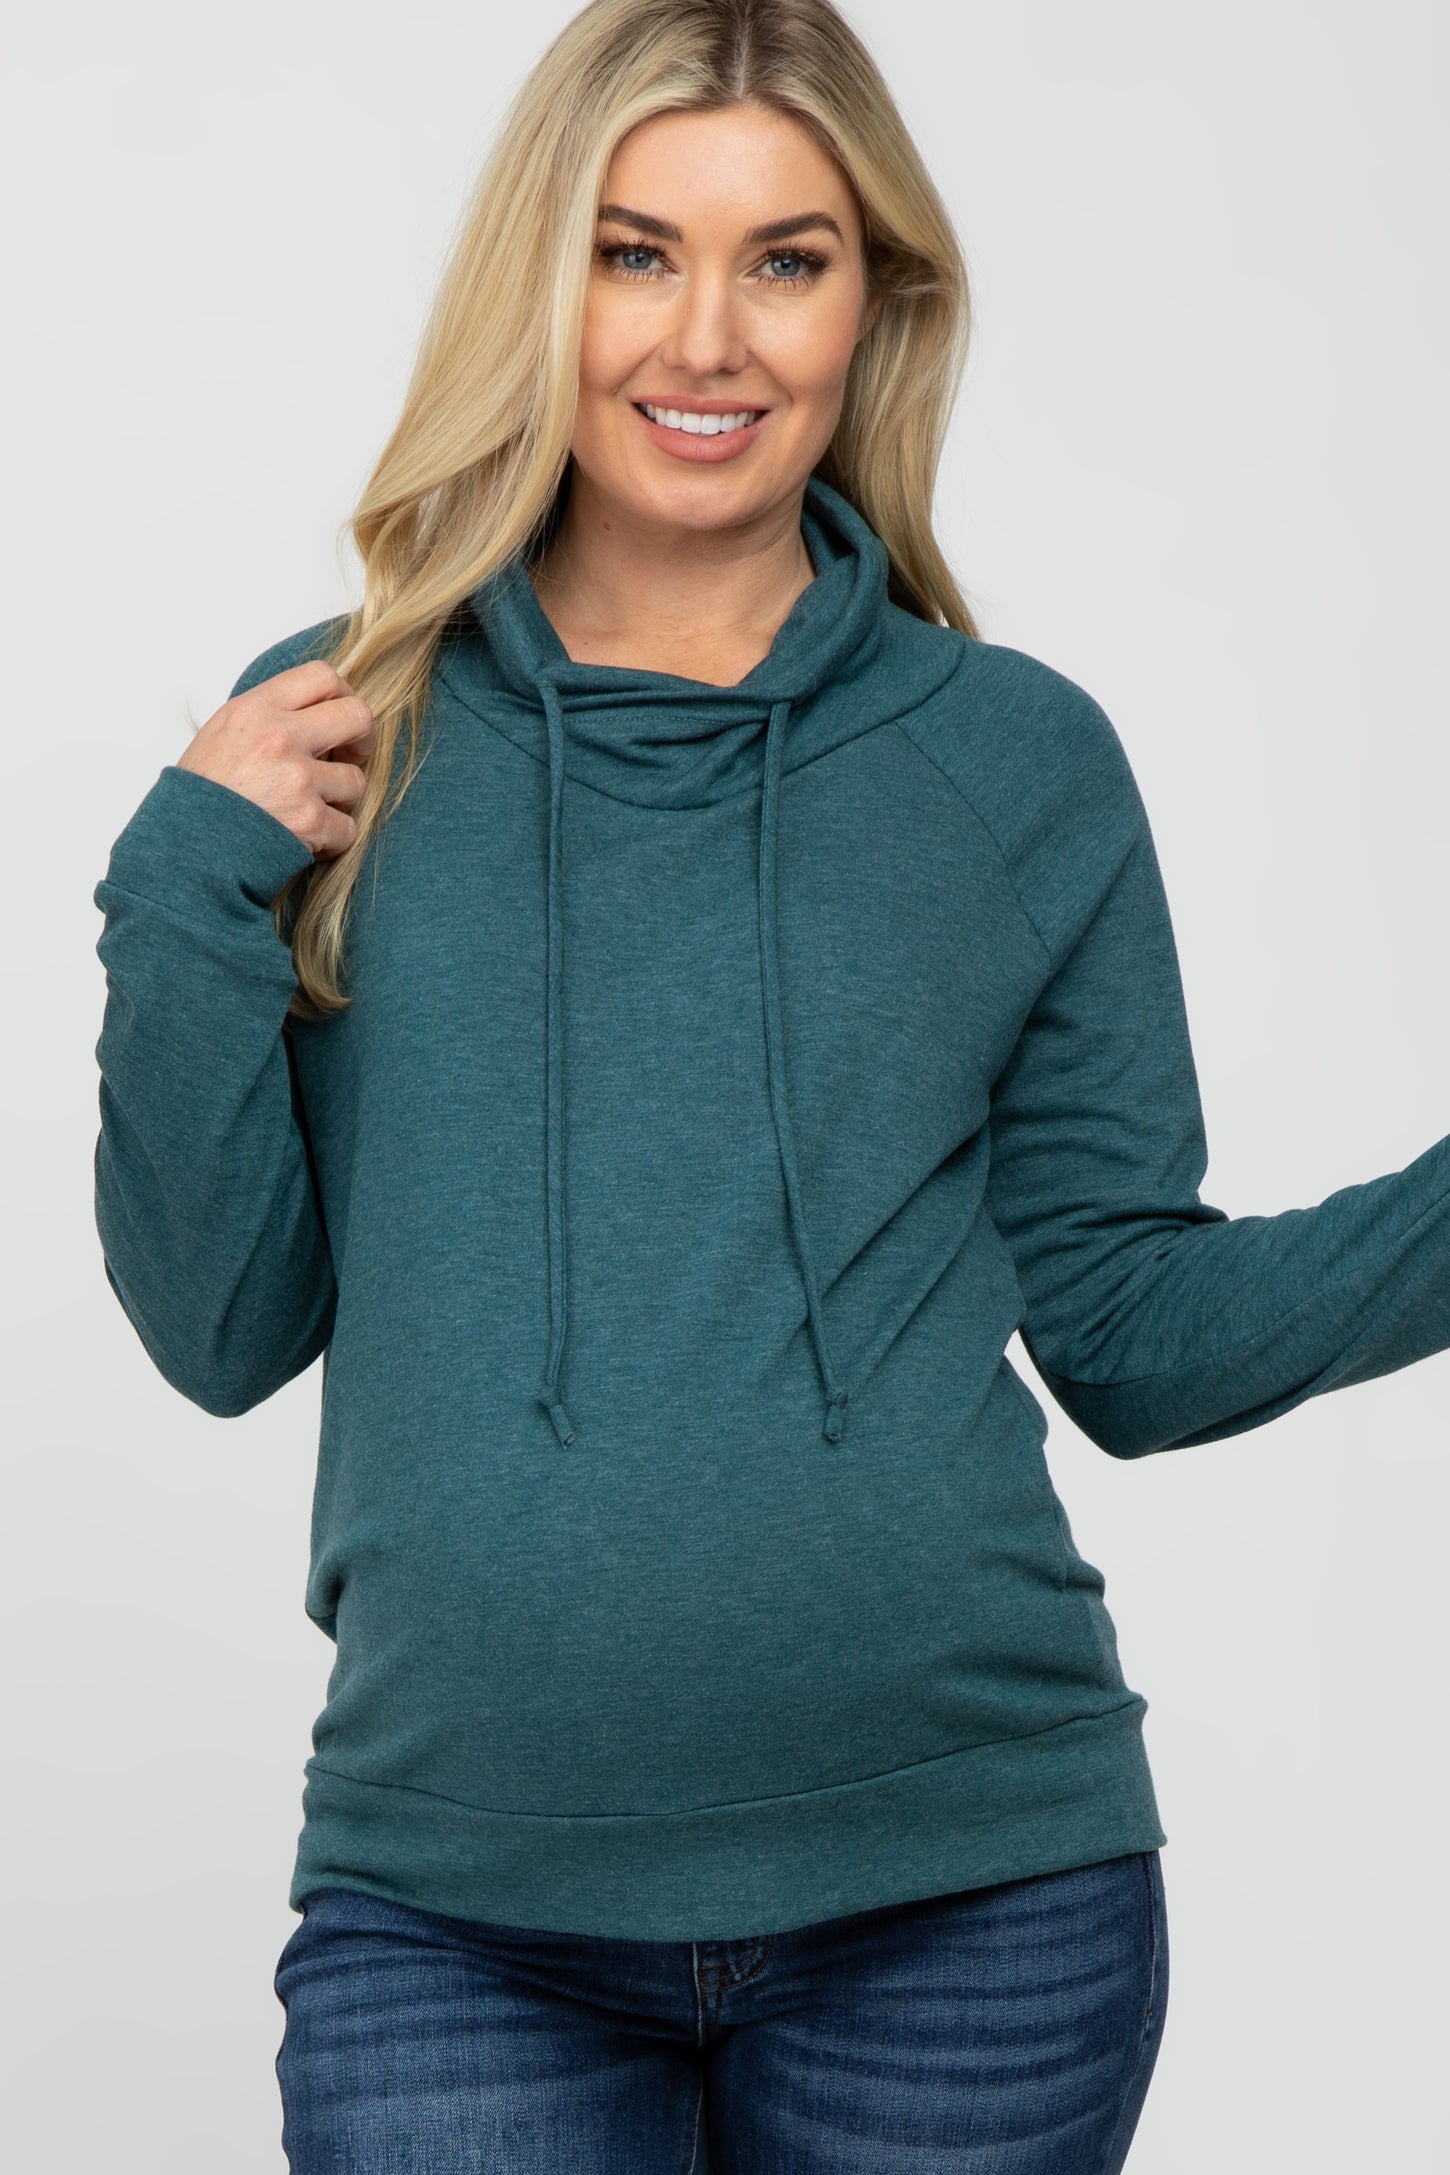 Teal Drawstring Cowl Neck Maternity Top